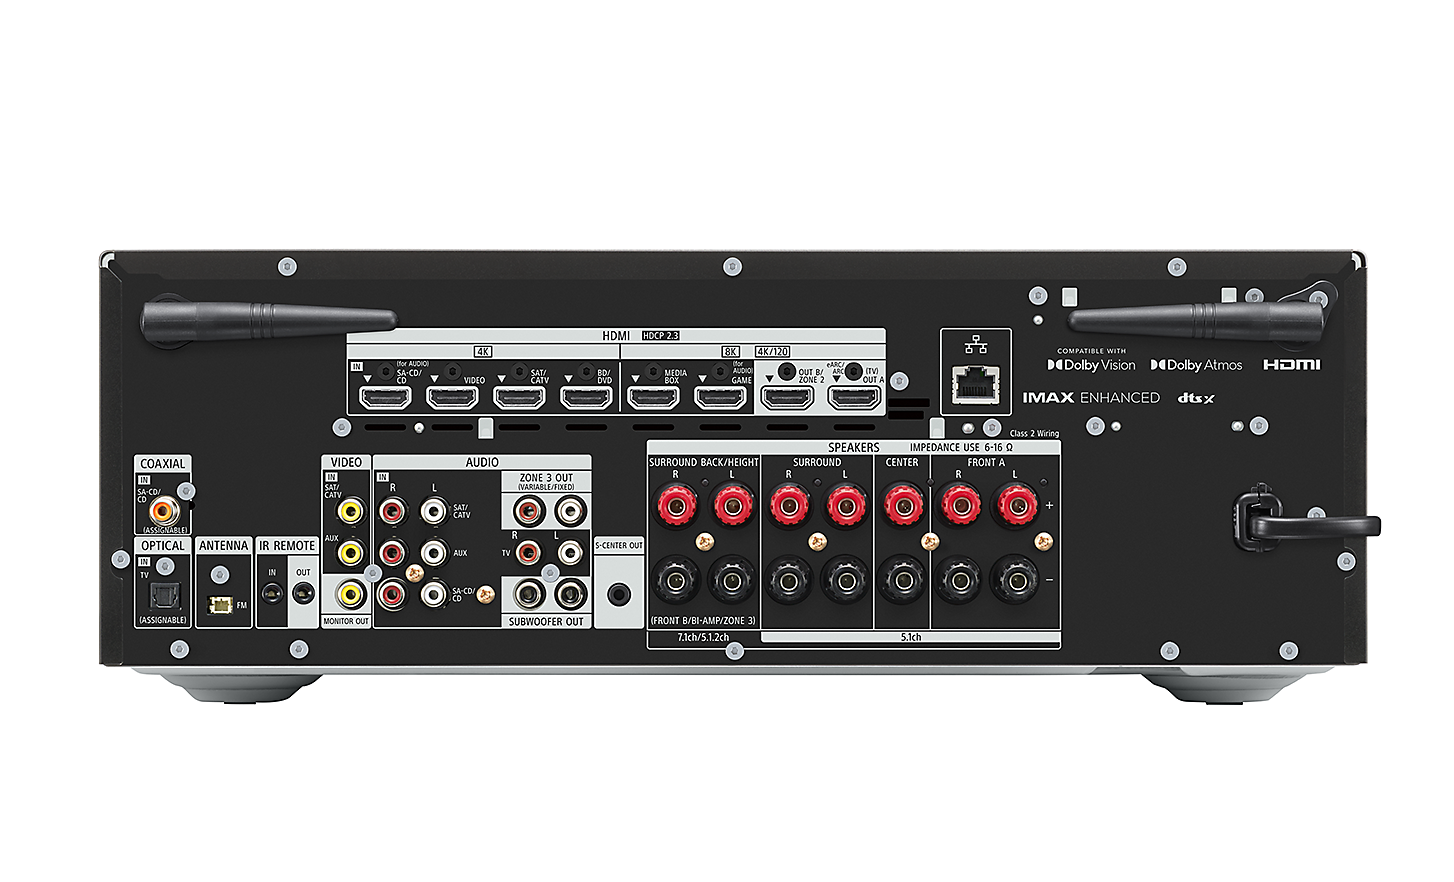 Image displaying the back of the AV receiver showing all of the available ports and connections